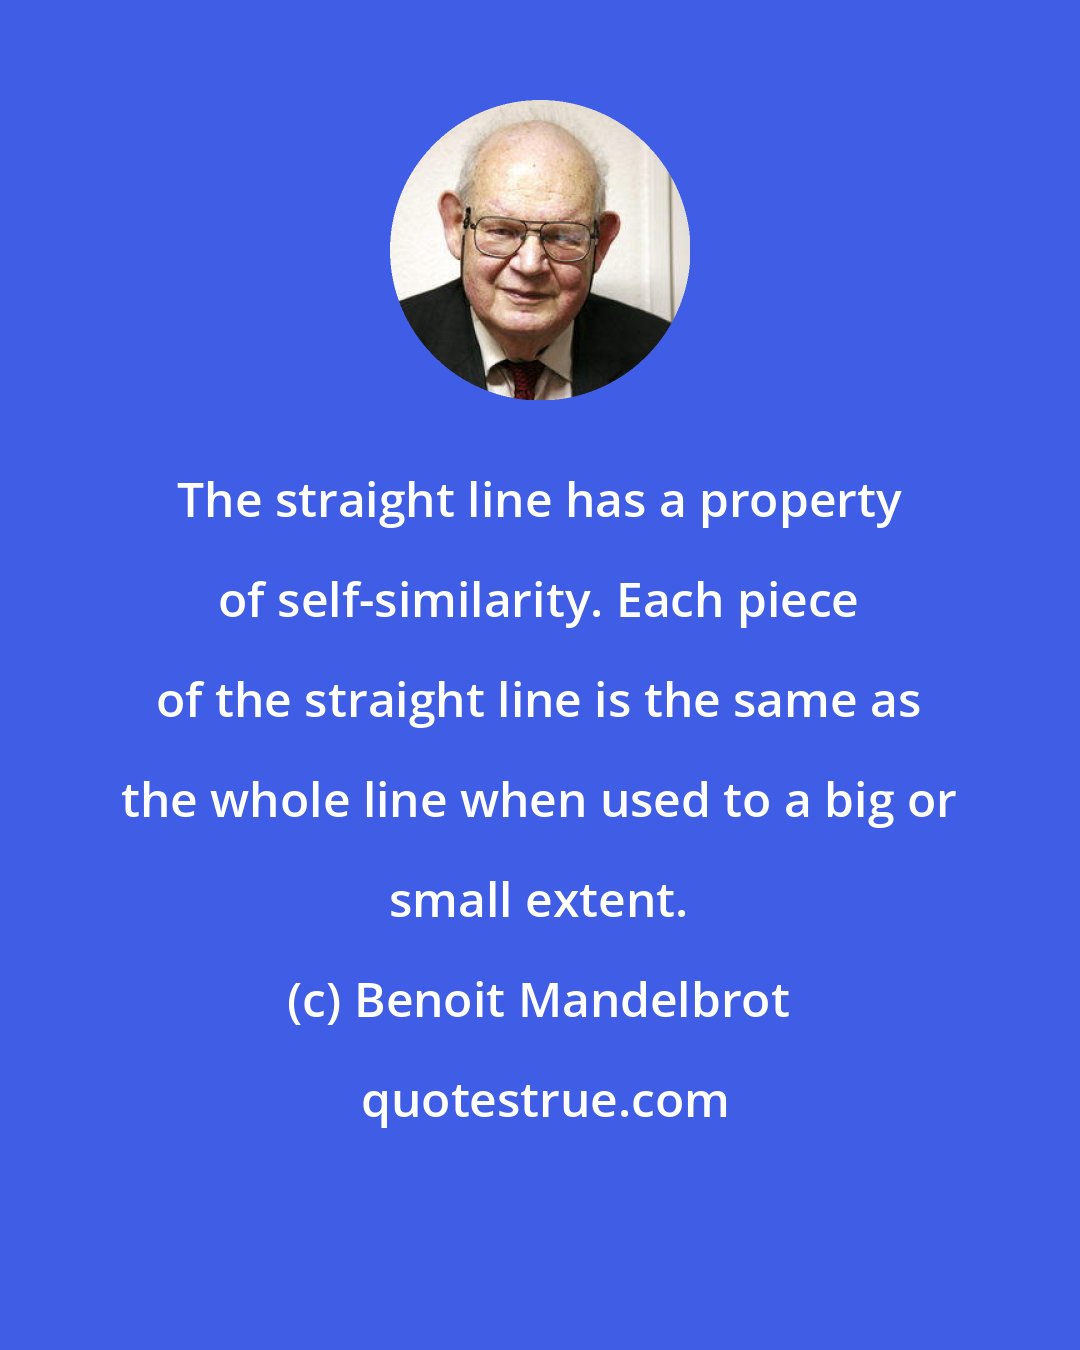 Benoit Mandelbrot: The straight line has a property of self-similarity. Each piece of the straight line is the same as the whole line when used to a big or small extent.